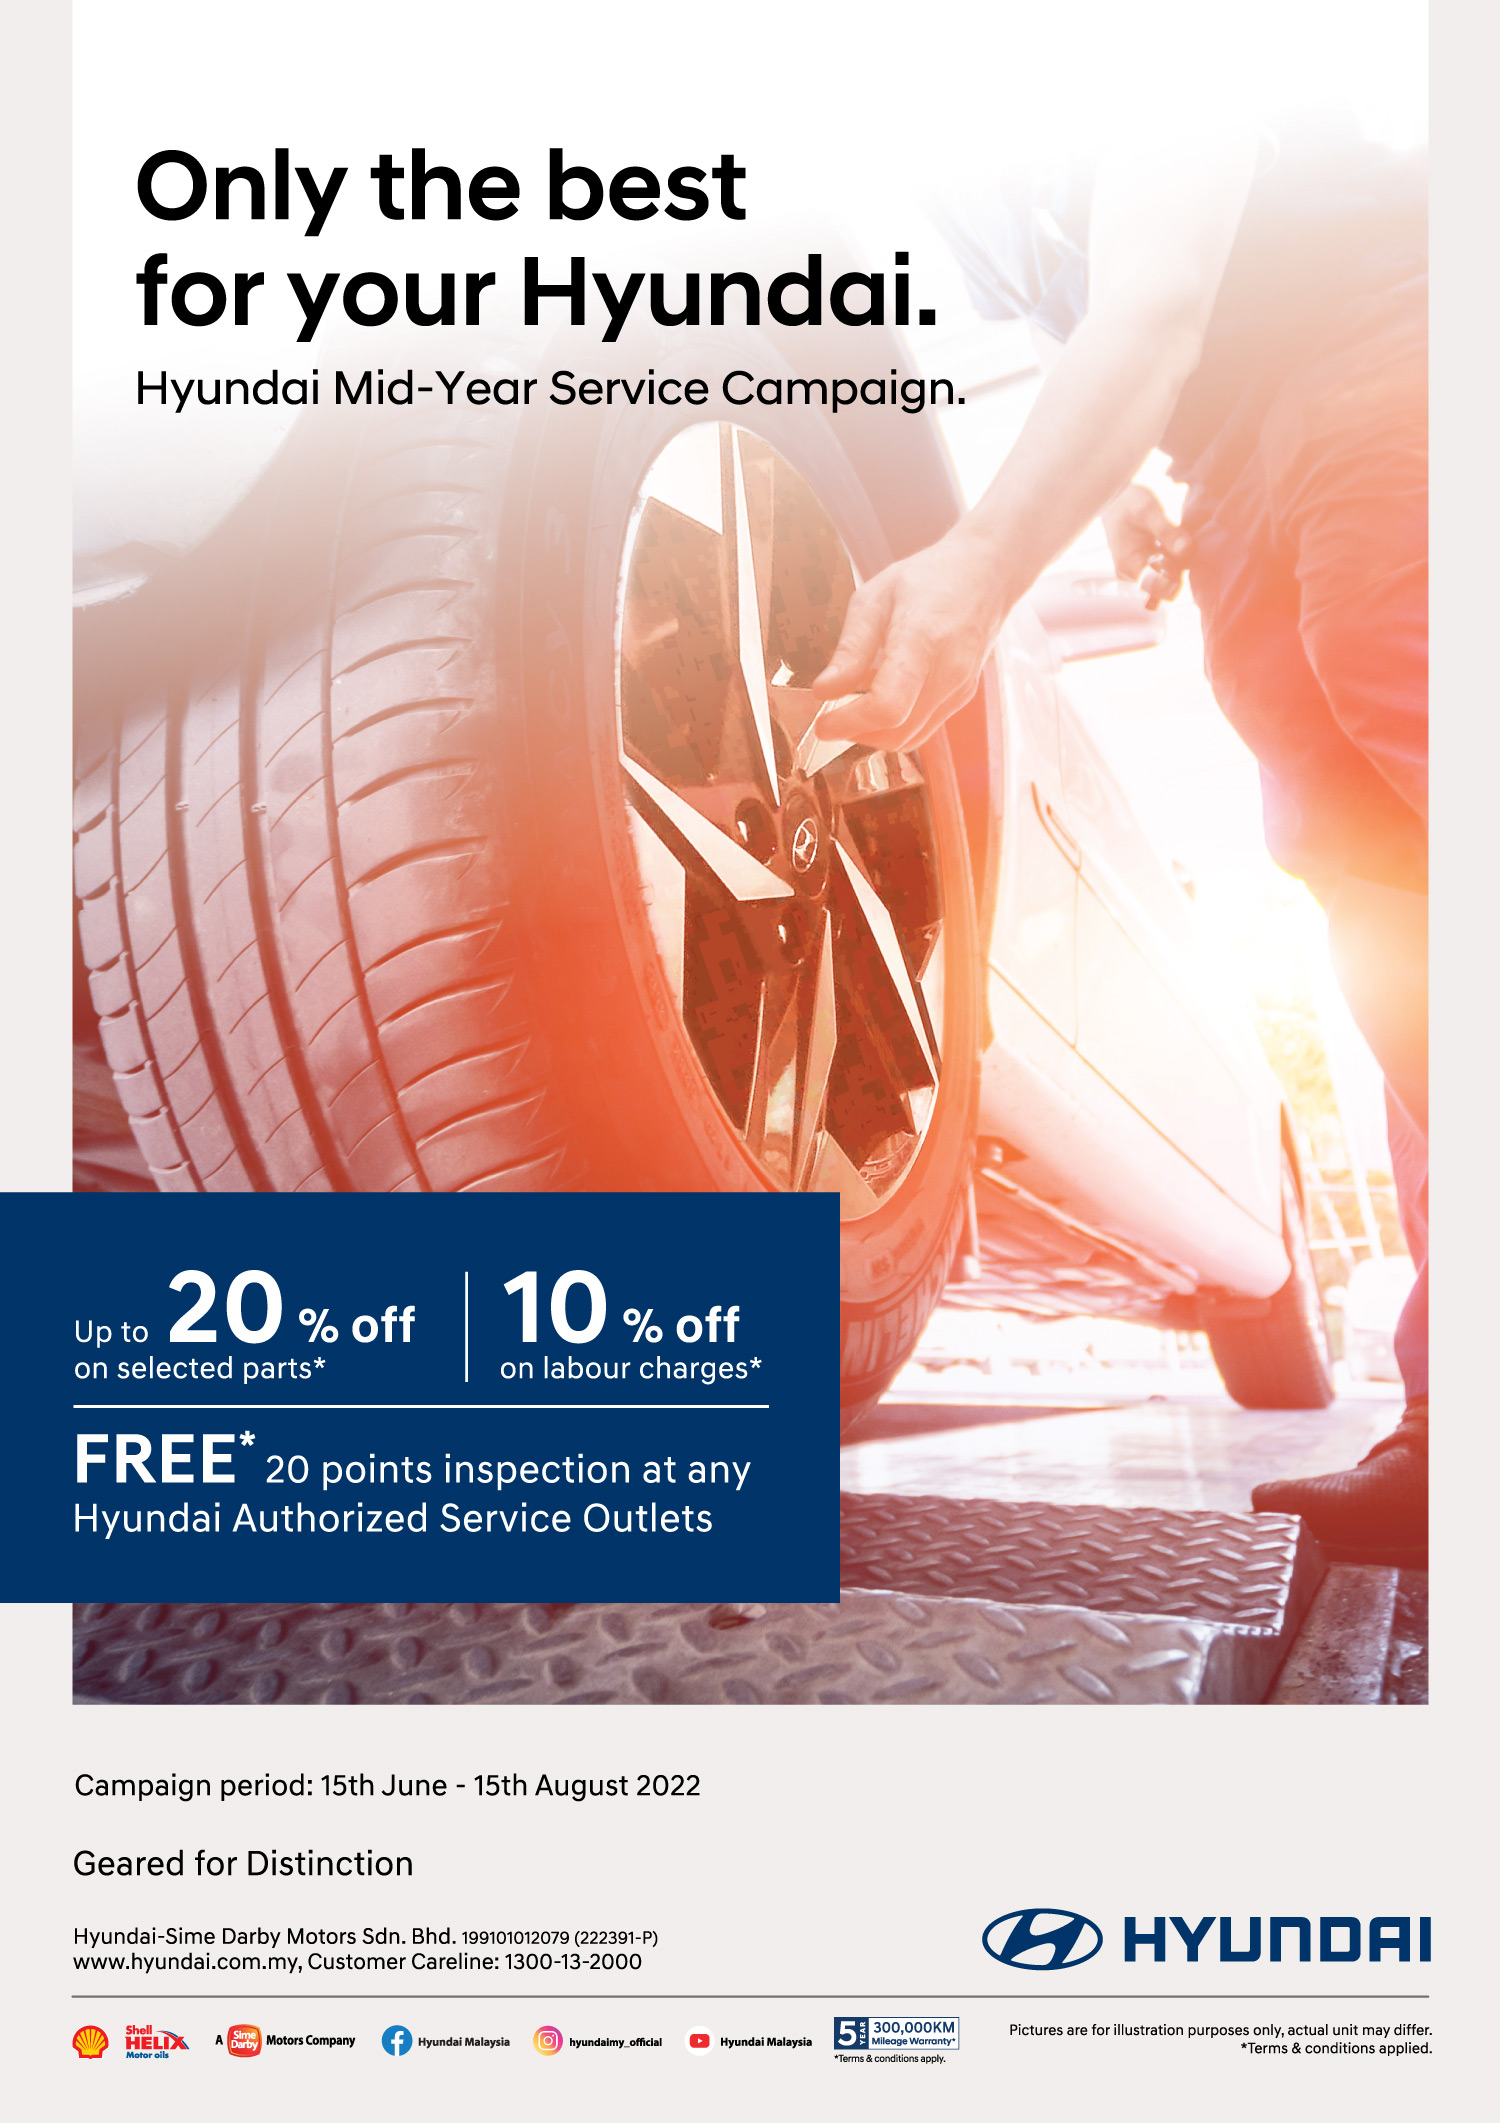 Only the best for your Hyundai. Hyundai Mid-year service campaign | Up to 20% off on selected genuine parts* | 10% off on labour charges*. FREE 20 points inspection at any Hyundai Authorized Service Outlets. Campaign Period : 15 June - 15 August 2022